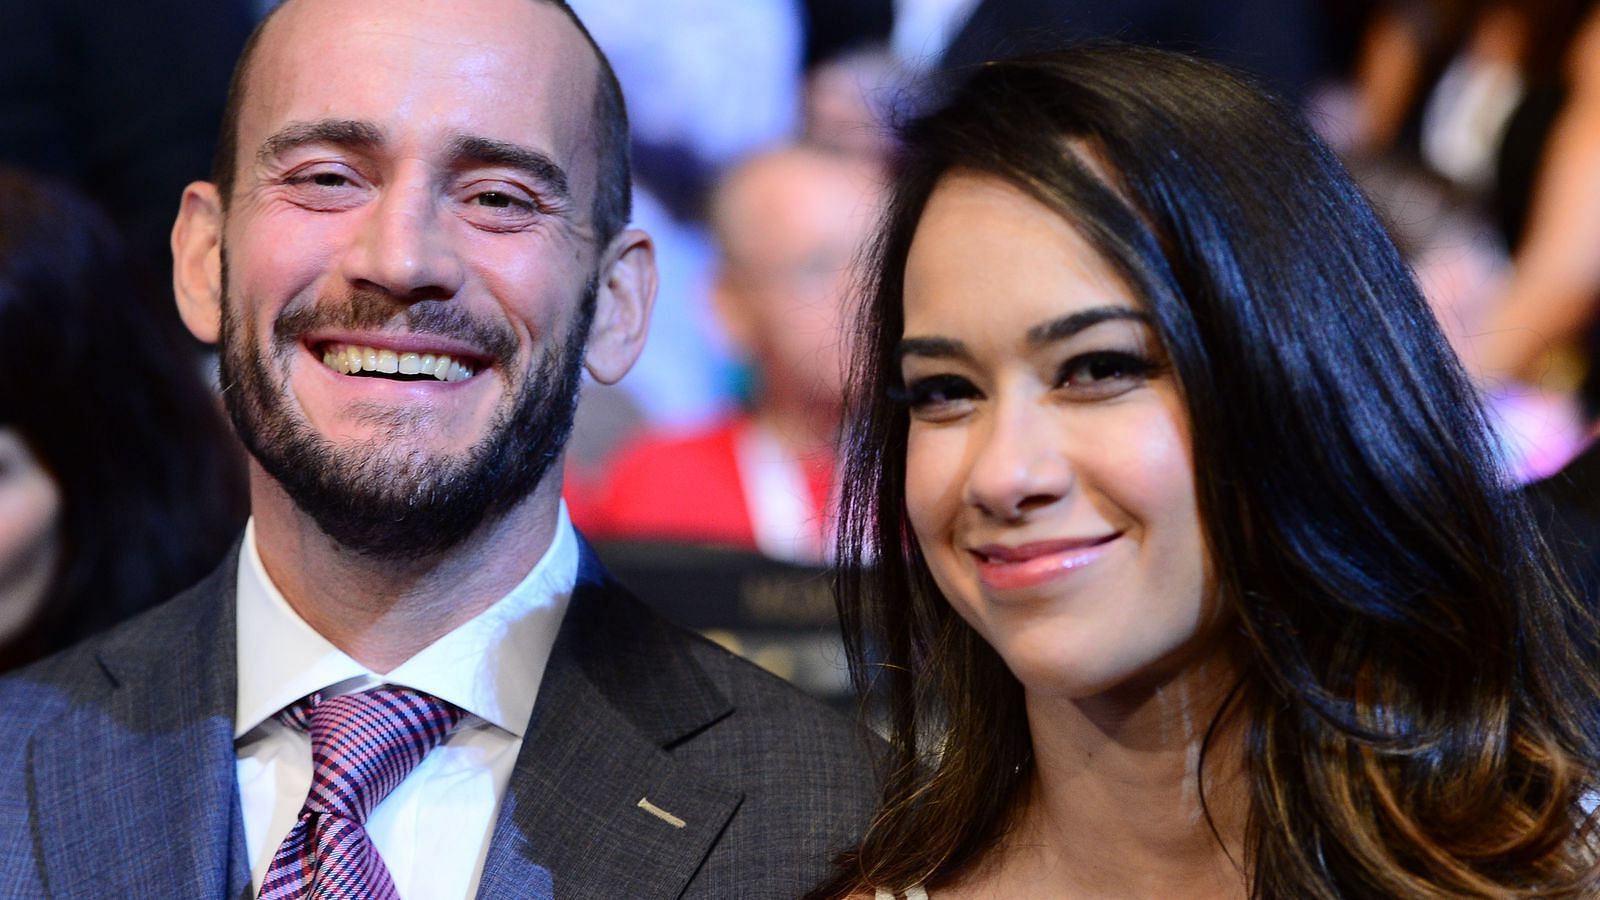 Both CM Punk and AJ Lee are back in the wrestling business